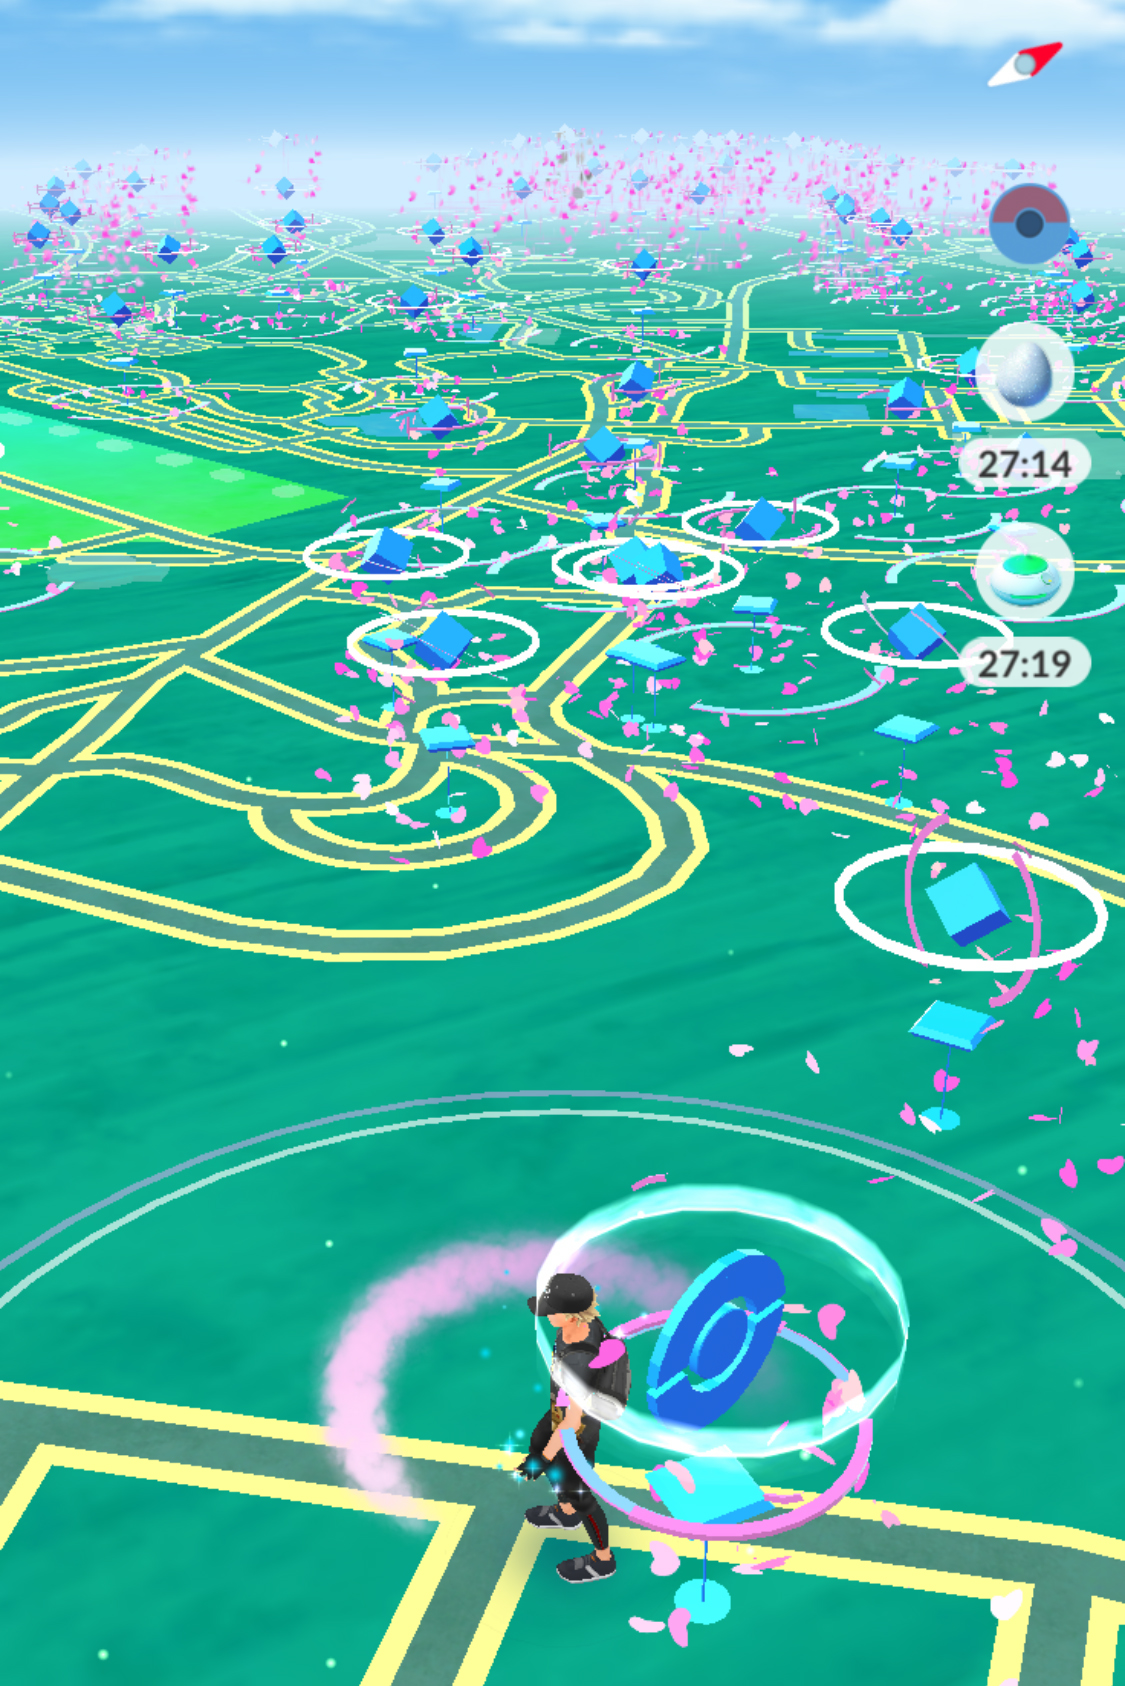 Pokemon Go Fest is like reliving the summer it launched and proves it